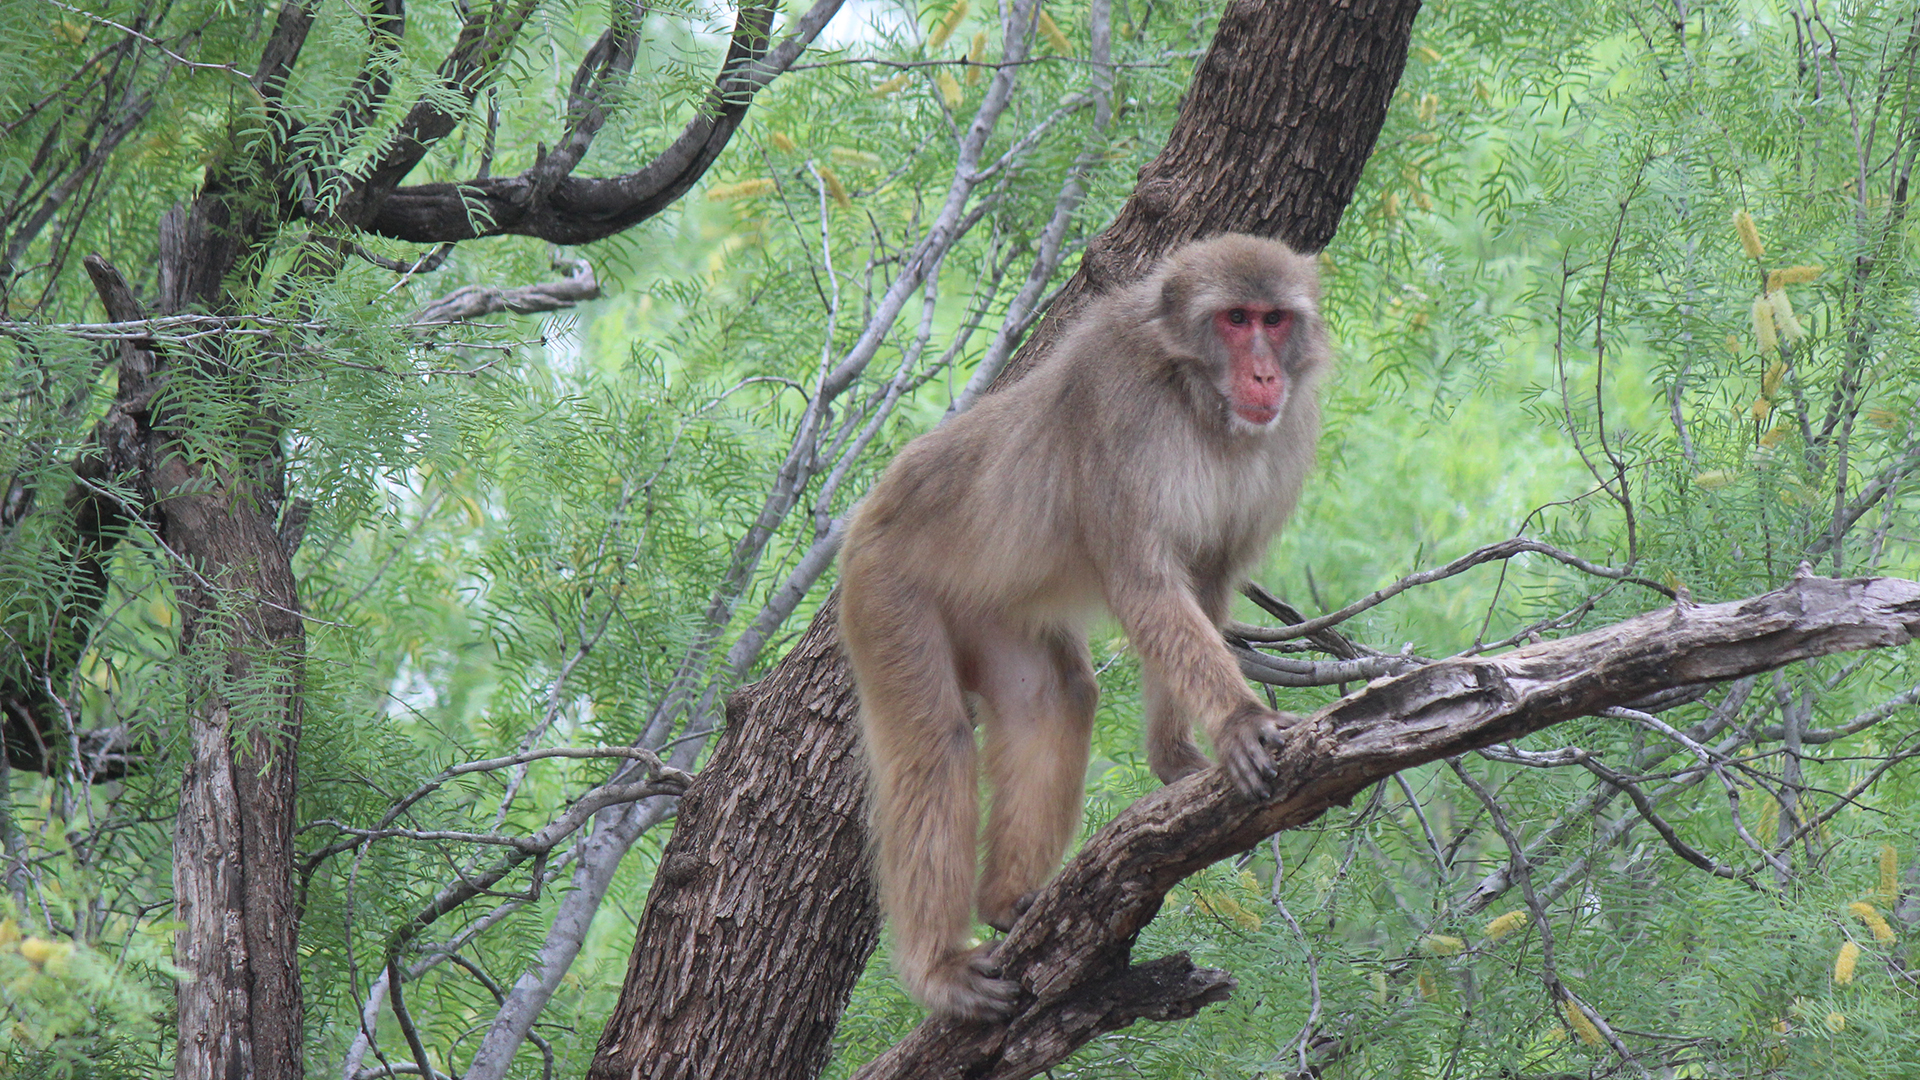 A monkey is sitting in the branch of a tree, looking towards the camera